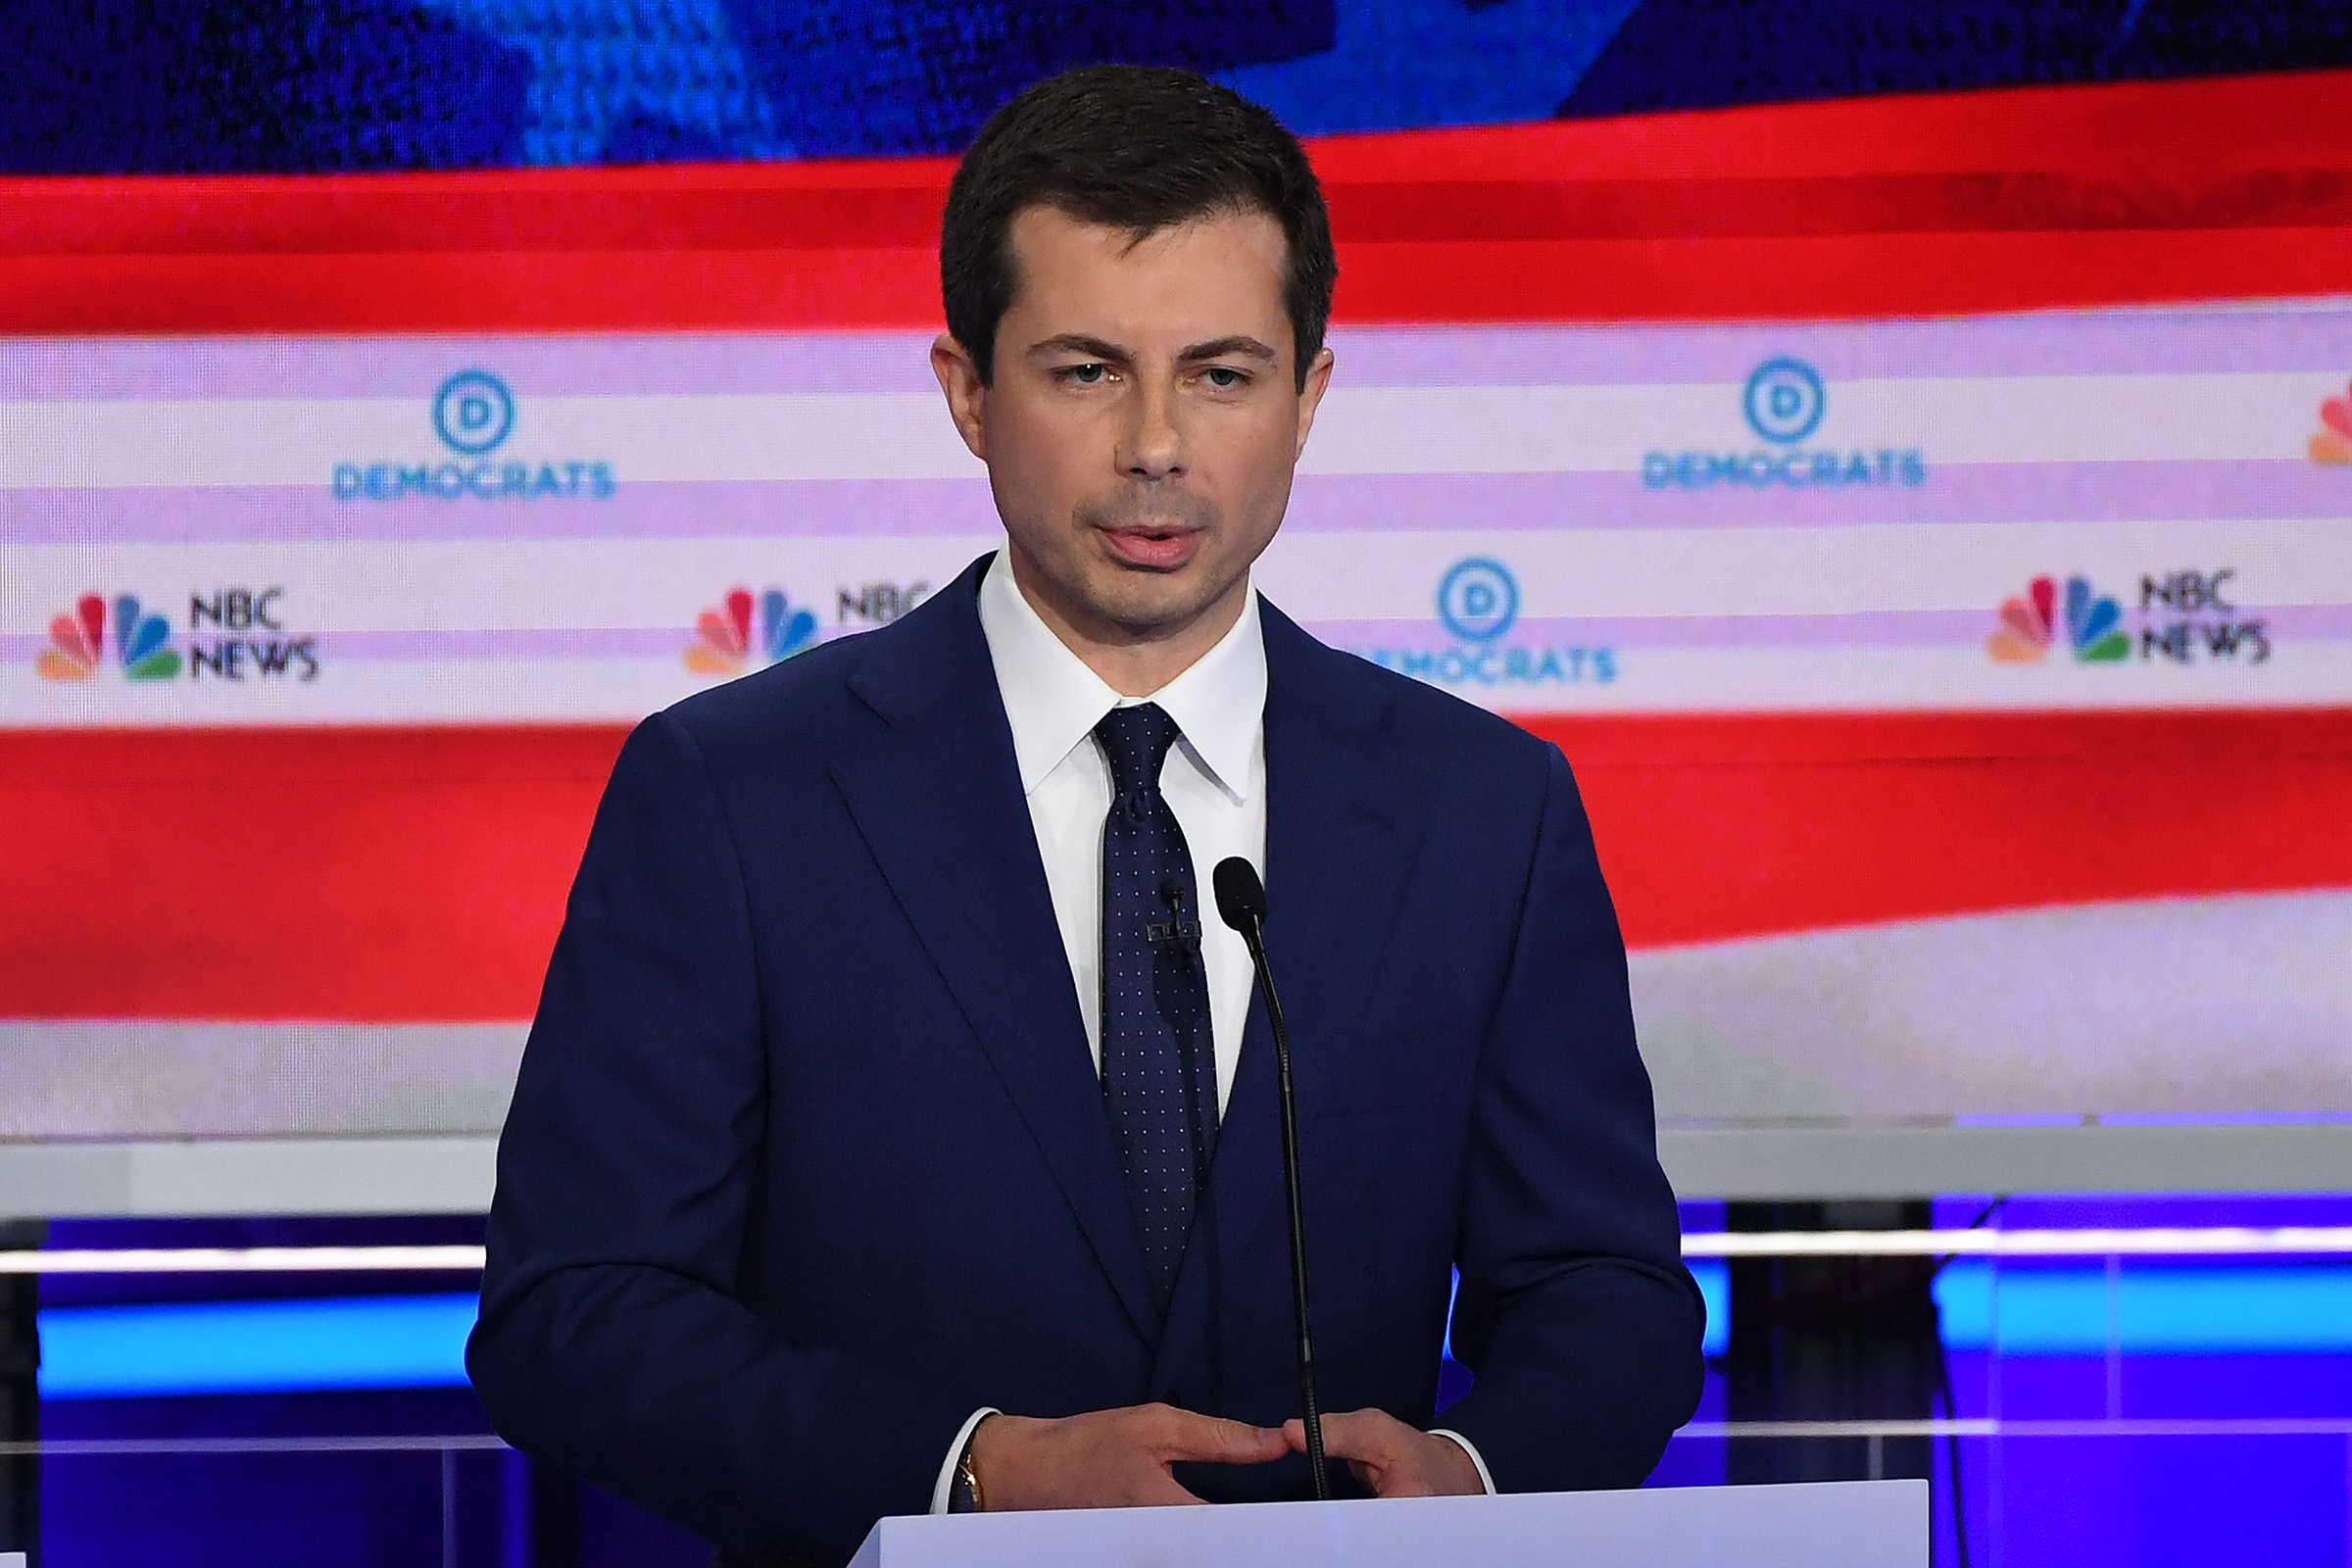 Democratic presidential hopeful Mayor of South Bend, Indiana Pete Buttigieg speaks during the second Democratic primary debate of the 2020 presidential campaign season hosted by NBC News at the Adrienne Arsht Center for the Performing Arts in Miami, Florida, June 27, 2019. (Saul Loeb—AFP/Getty Images)